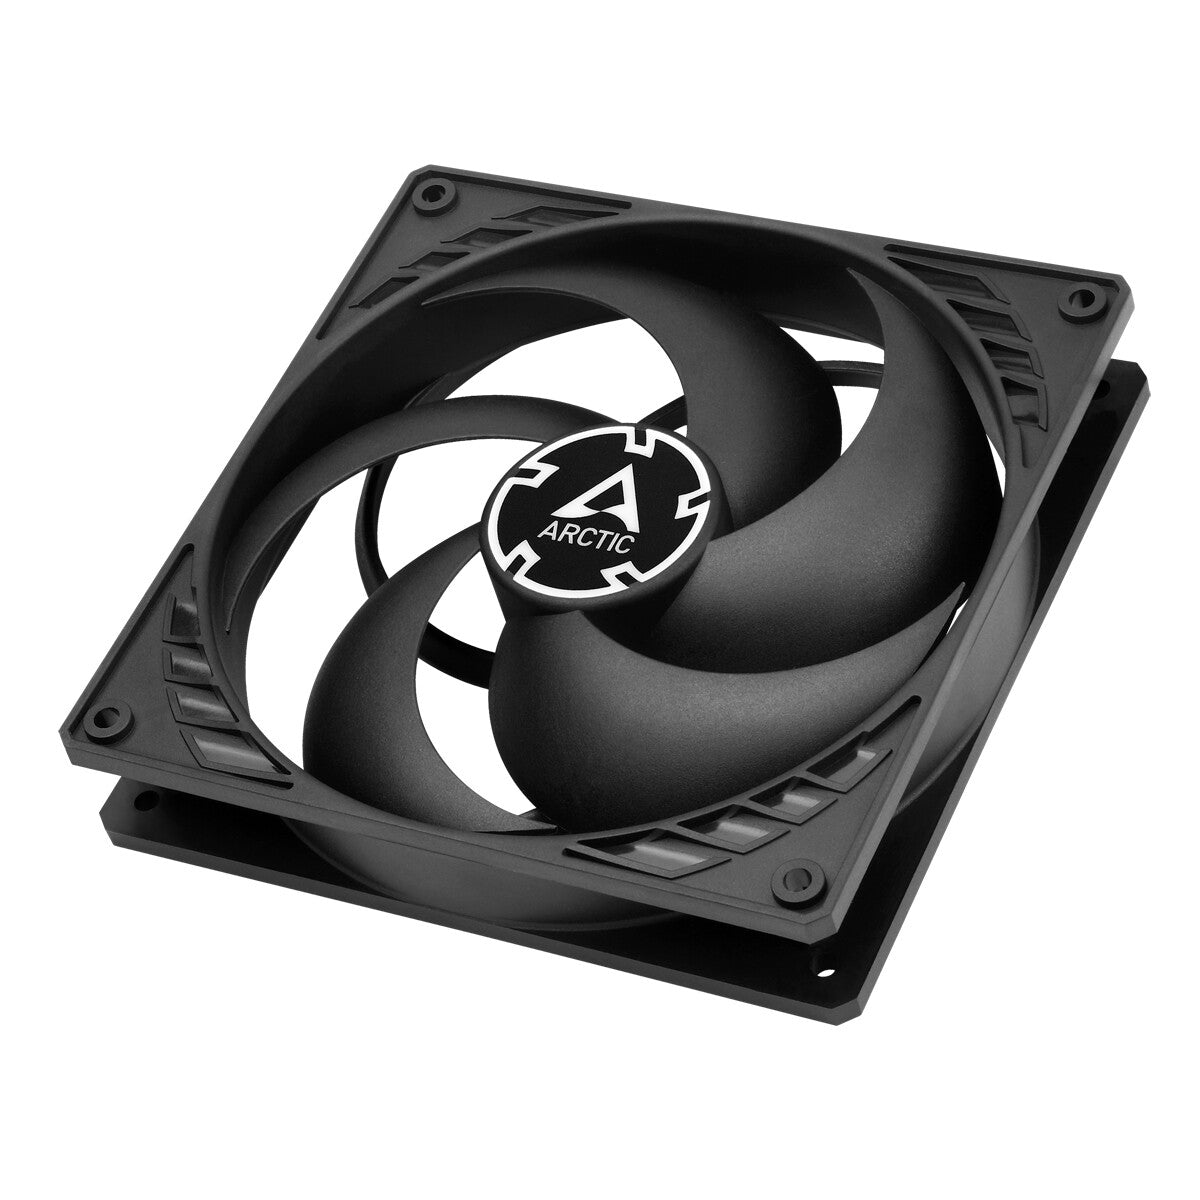 ARCTIC P14 - Computer Case Fan in Black - 140mm (Pack of 5)